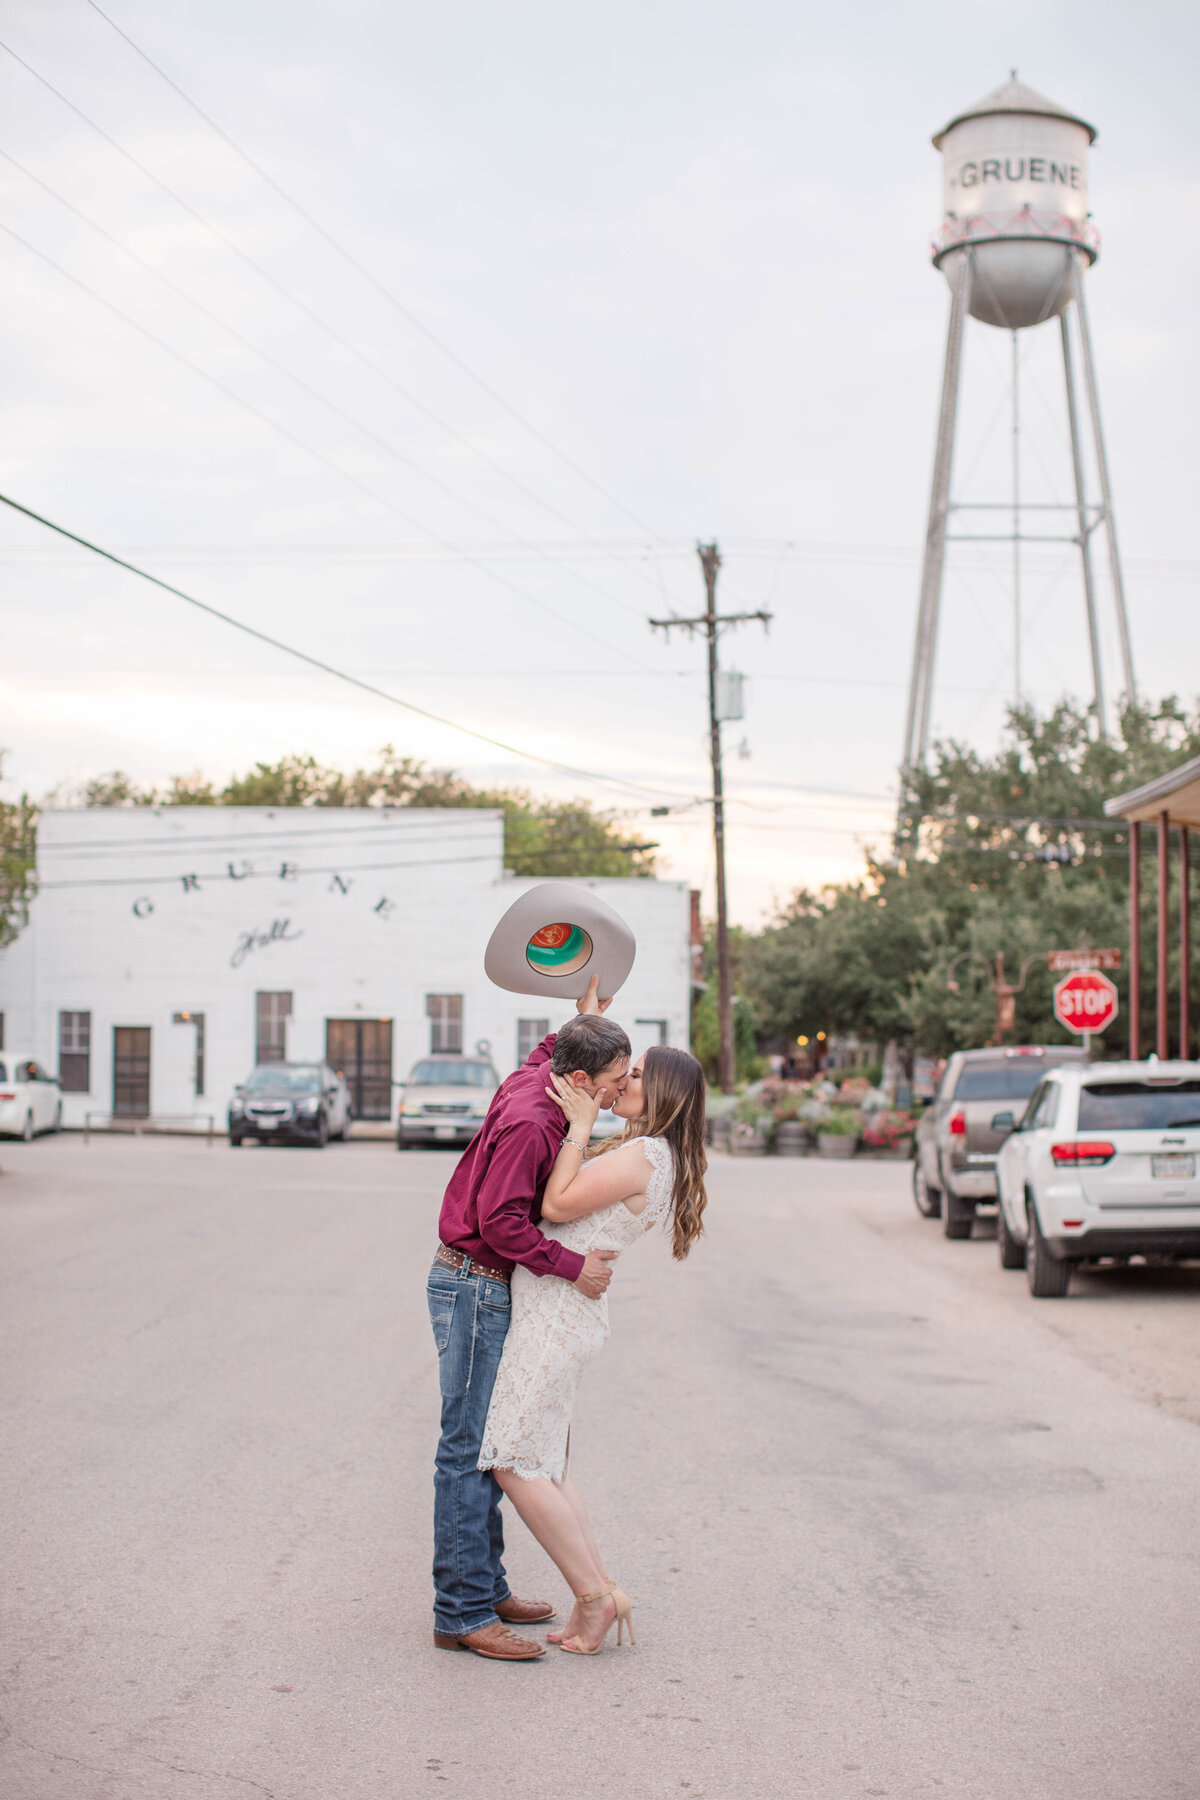 engagement portrait big kiss with cowboy hat in street of Gruene Hall with water tower by New Braunfels wedding photographer Firefly Photography